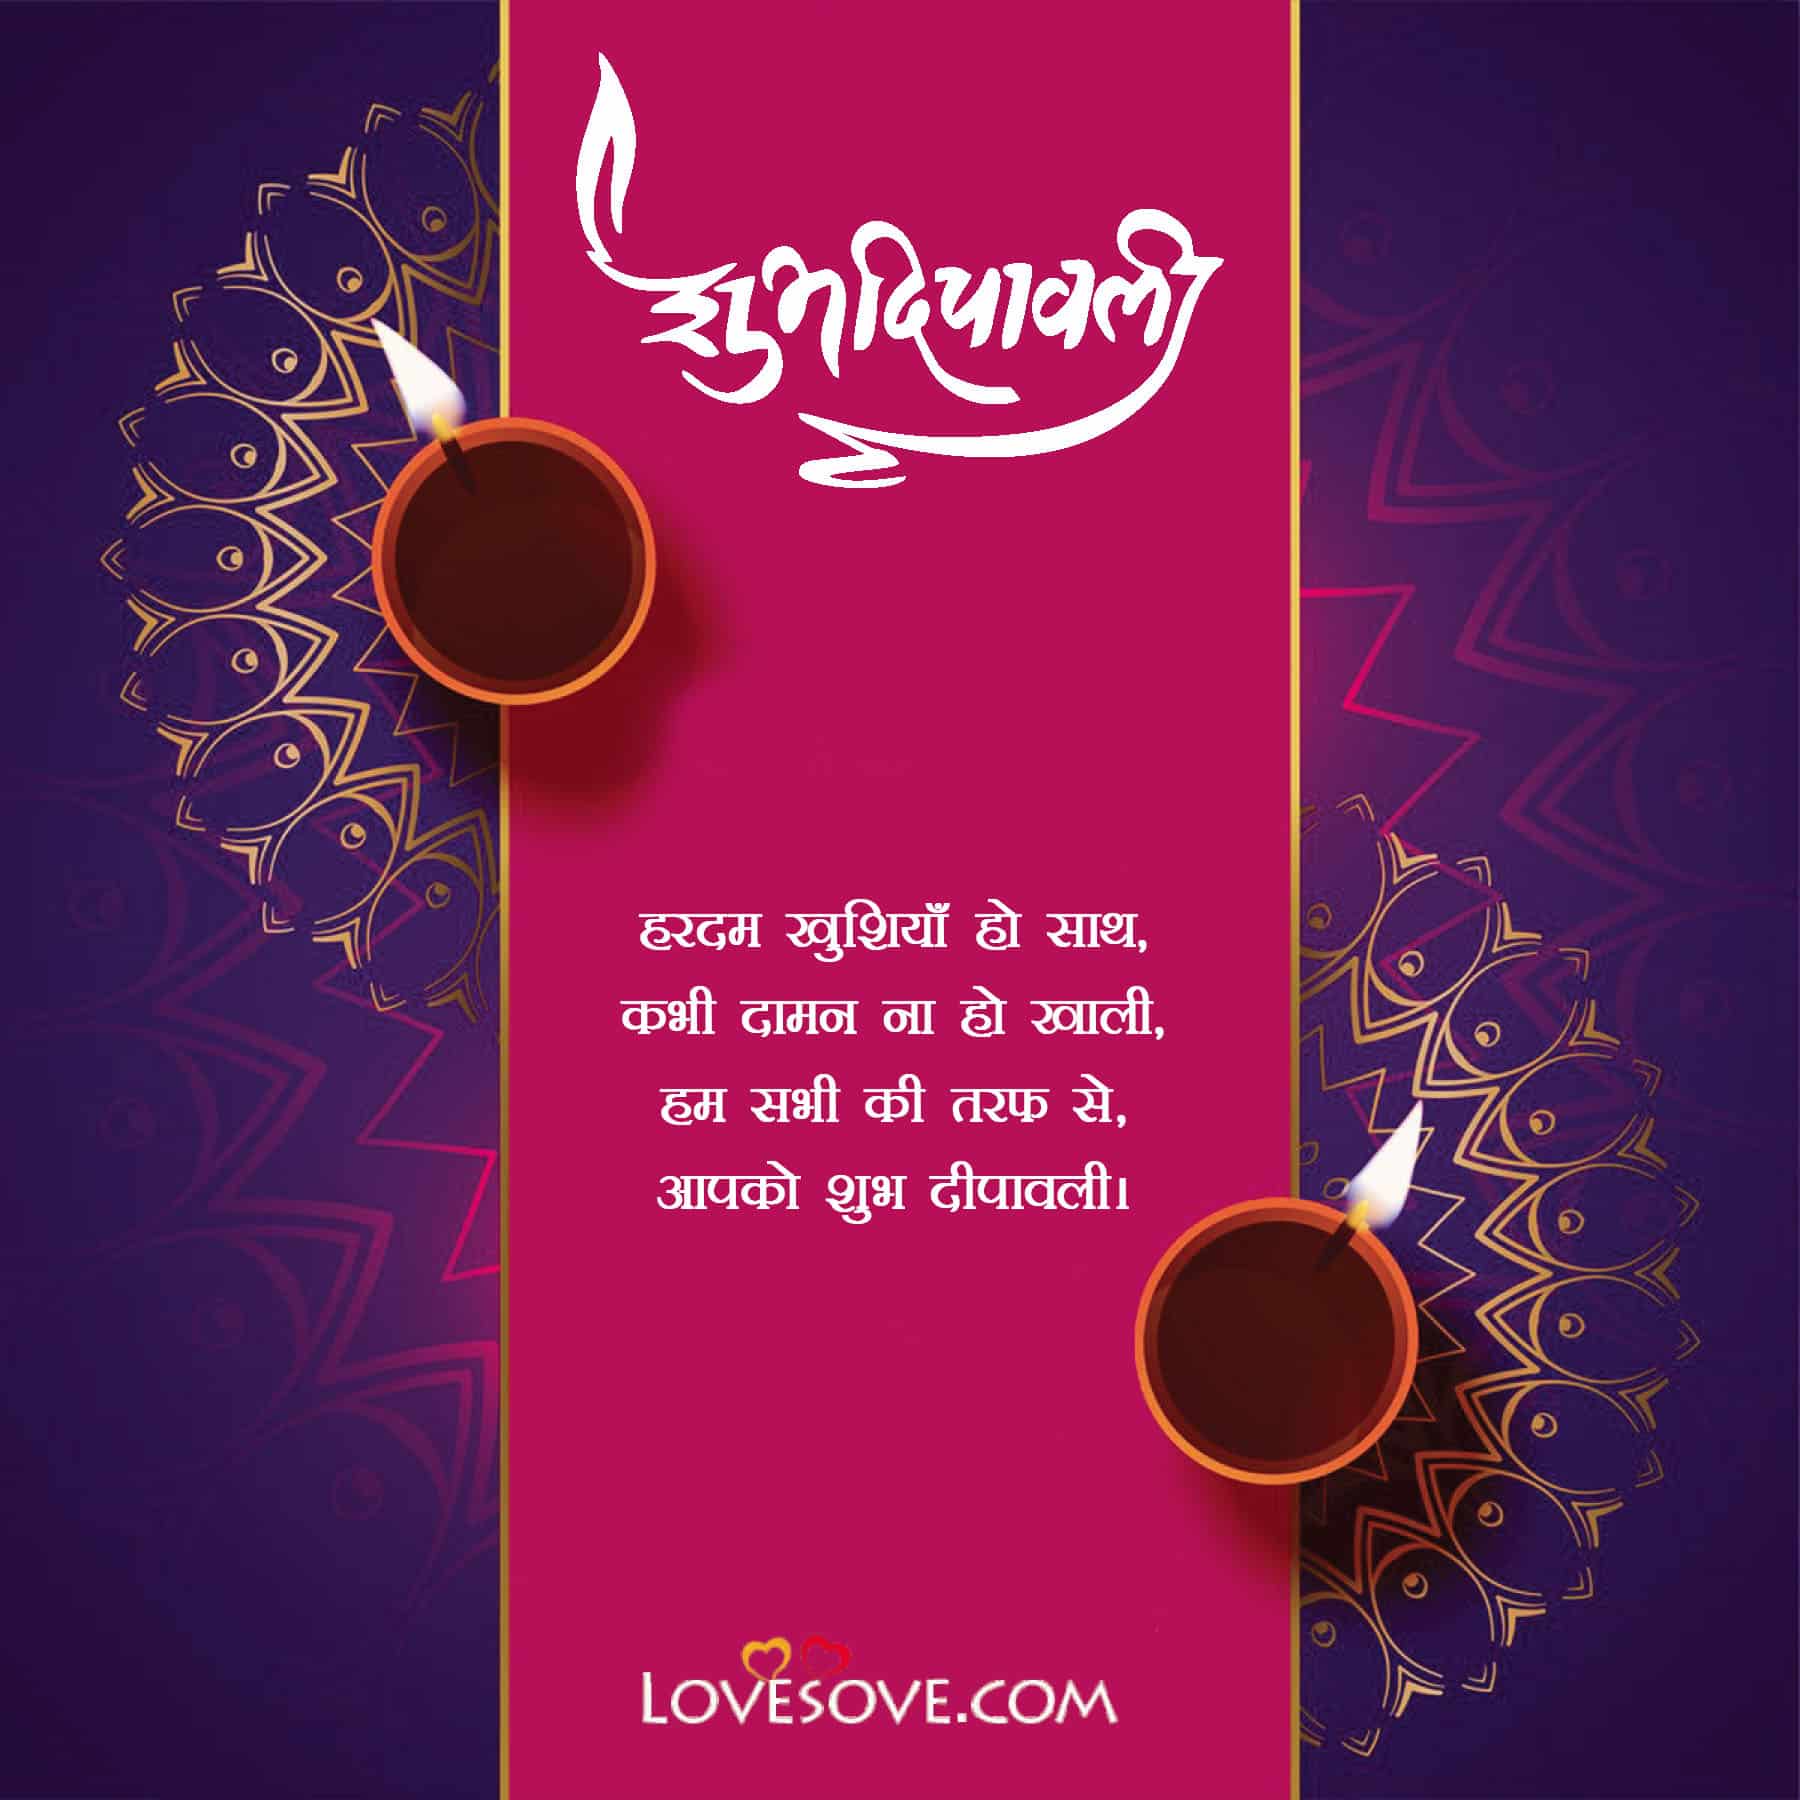 Happy Diwali Awesome Quotes Lovesove